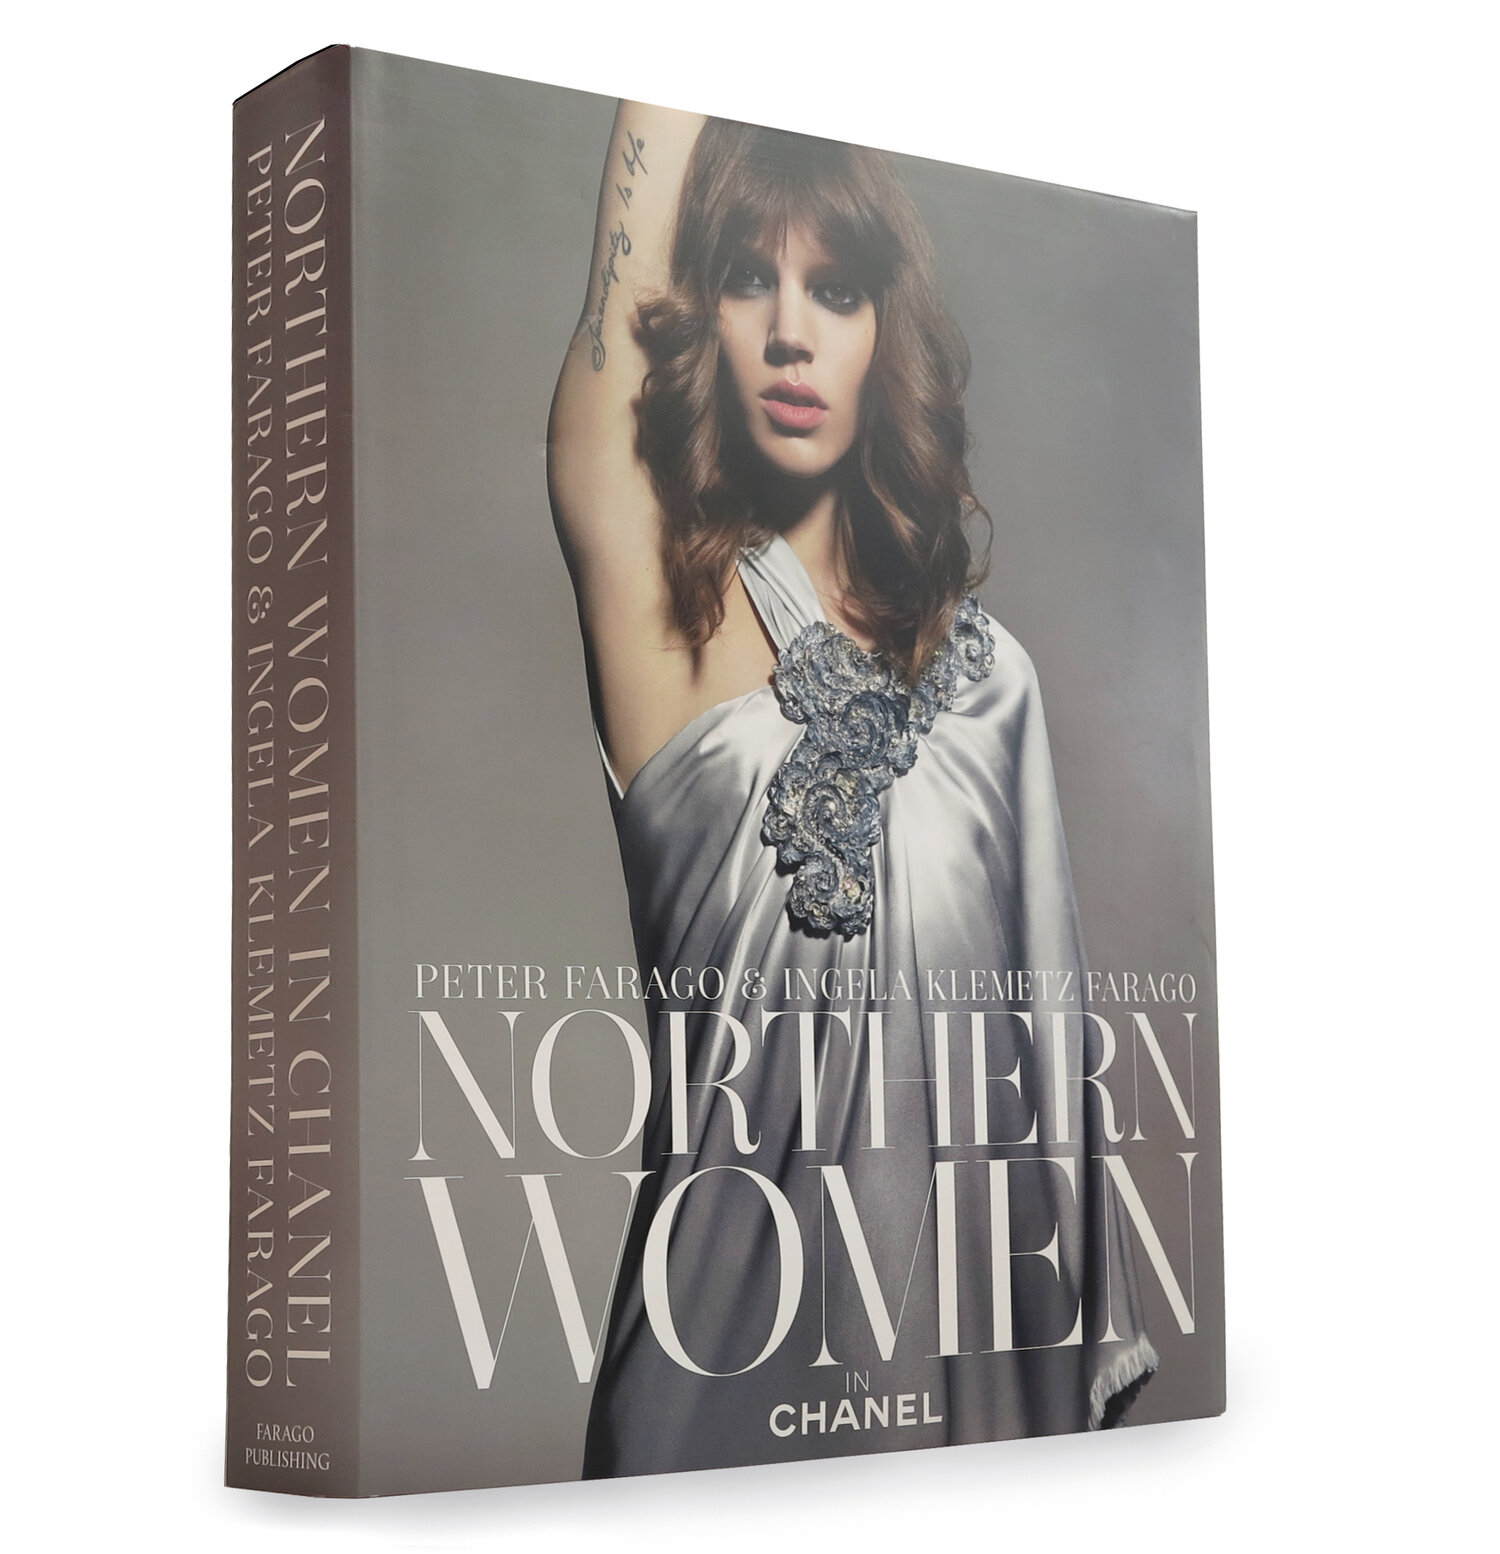 NORTHERN WOMEN IN CHANEL COLLECTORS EDITION - FROM THE LIBRARY OF